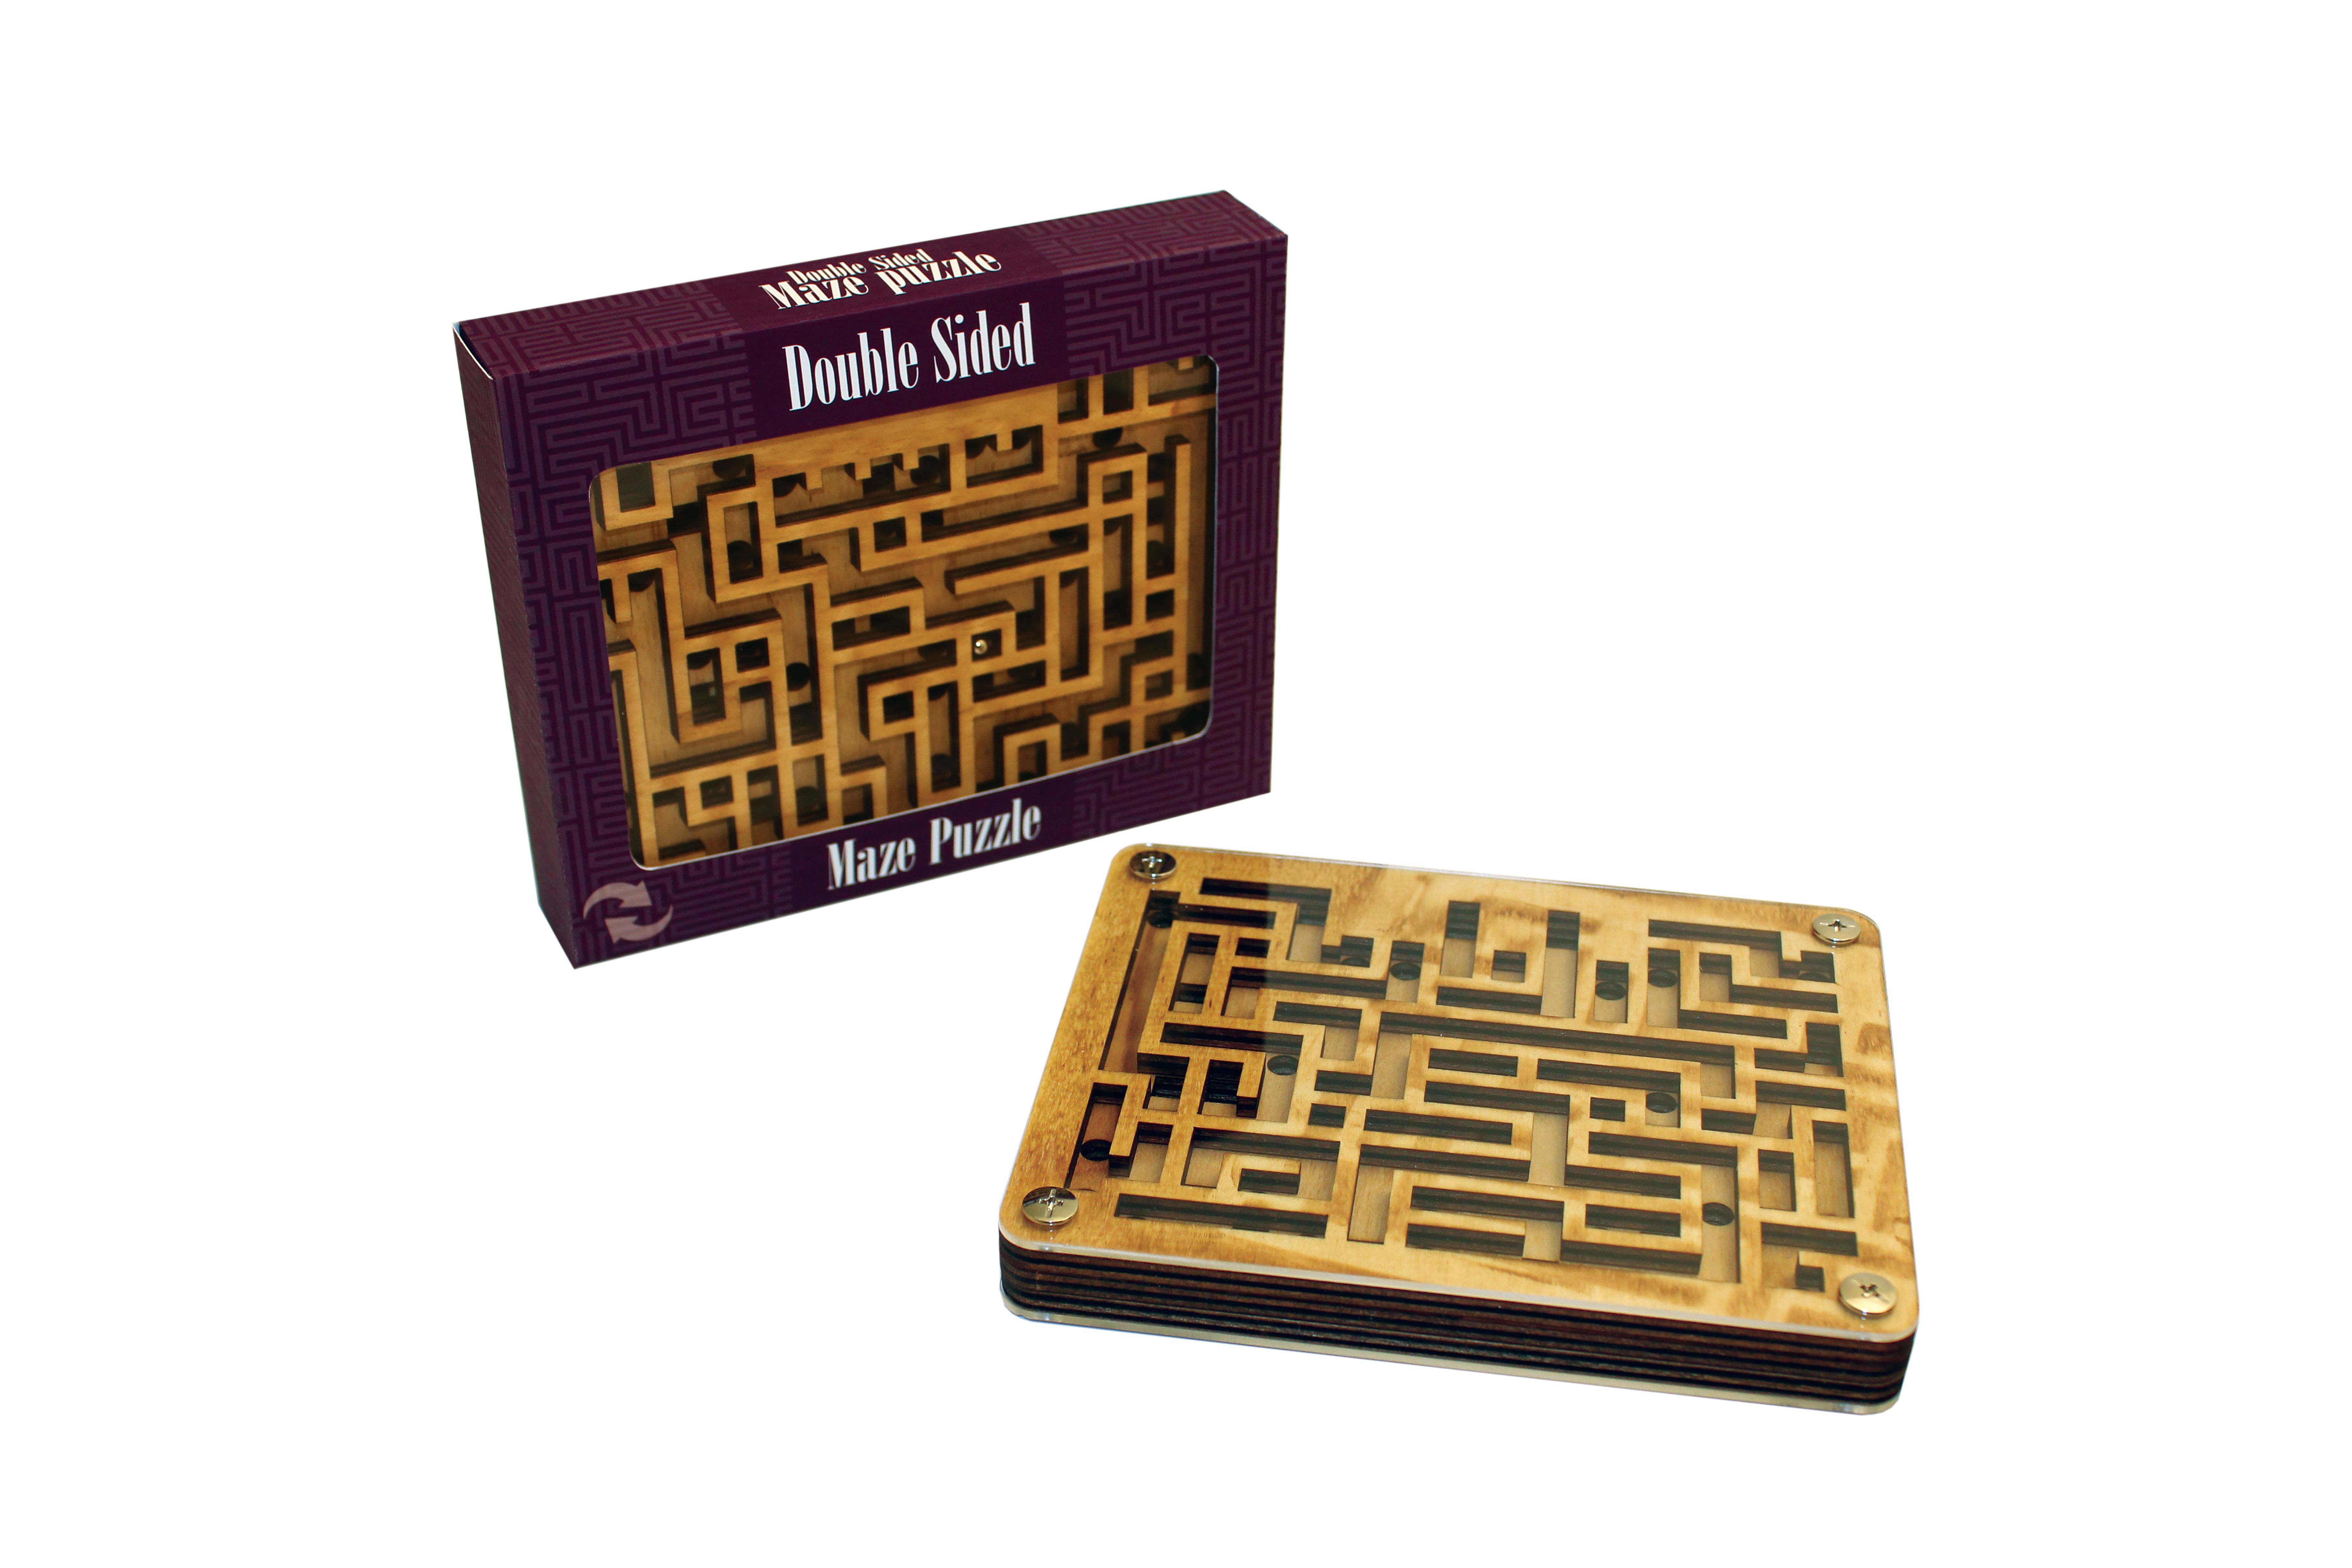 Double sided Maze Puzzle